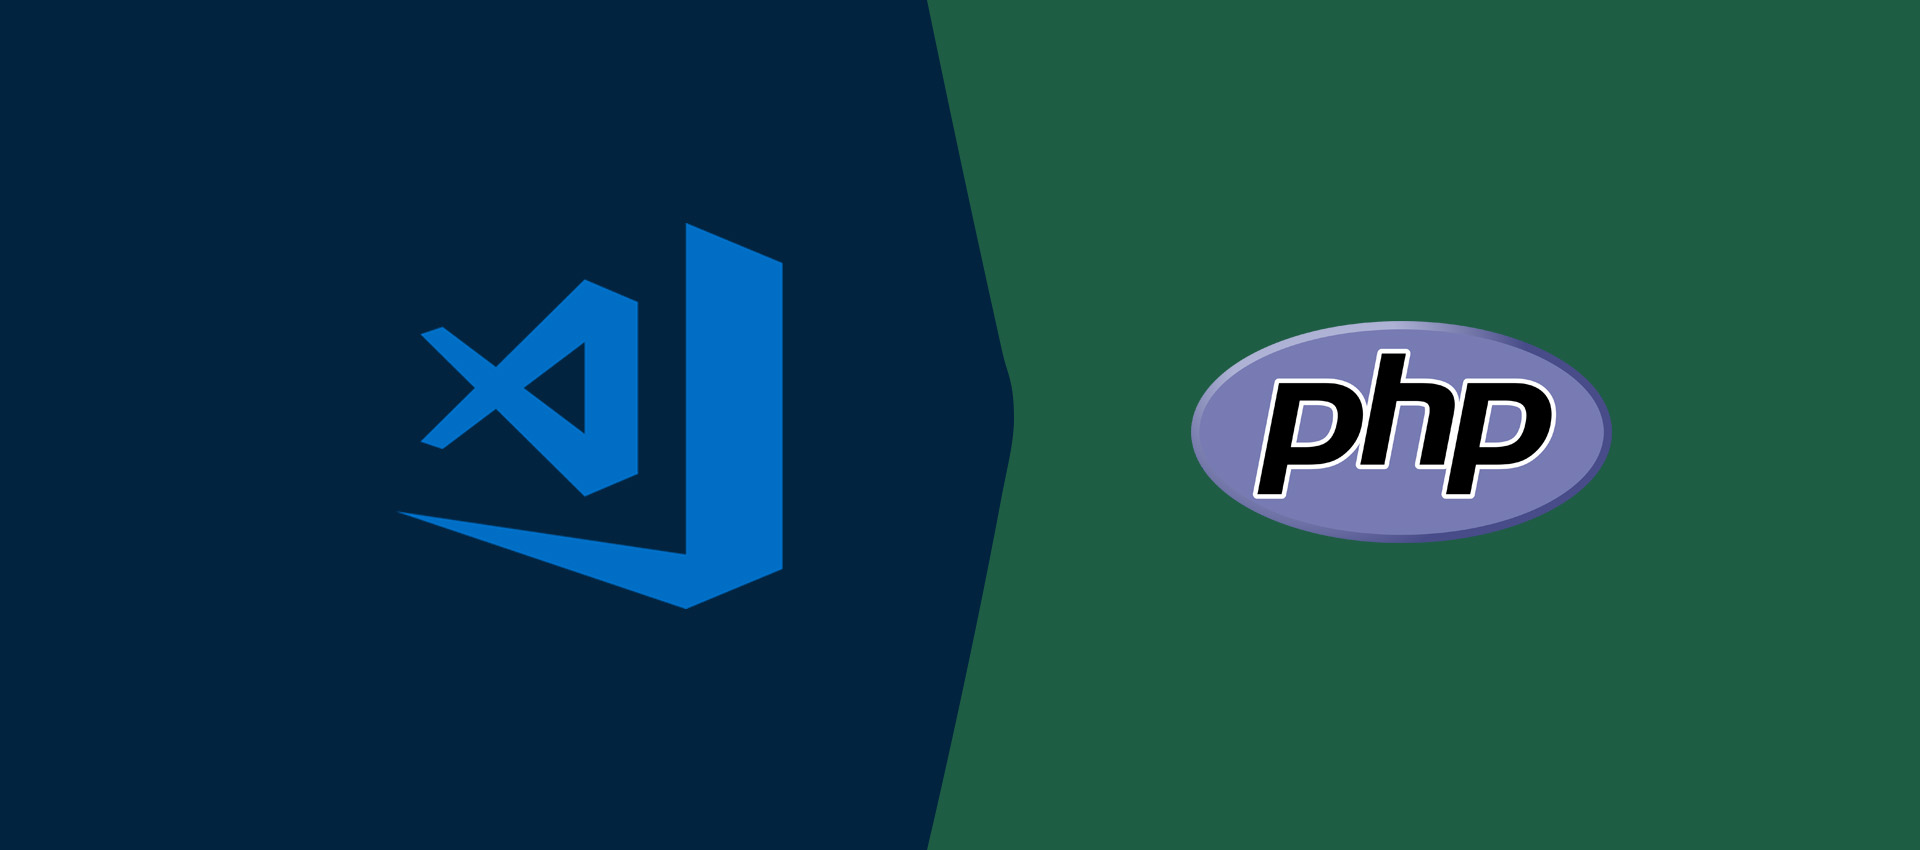 How To Install VSCode For PHP On Ubuntu